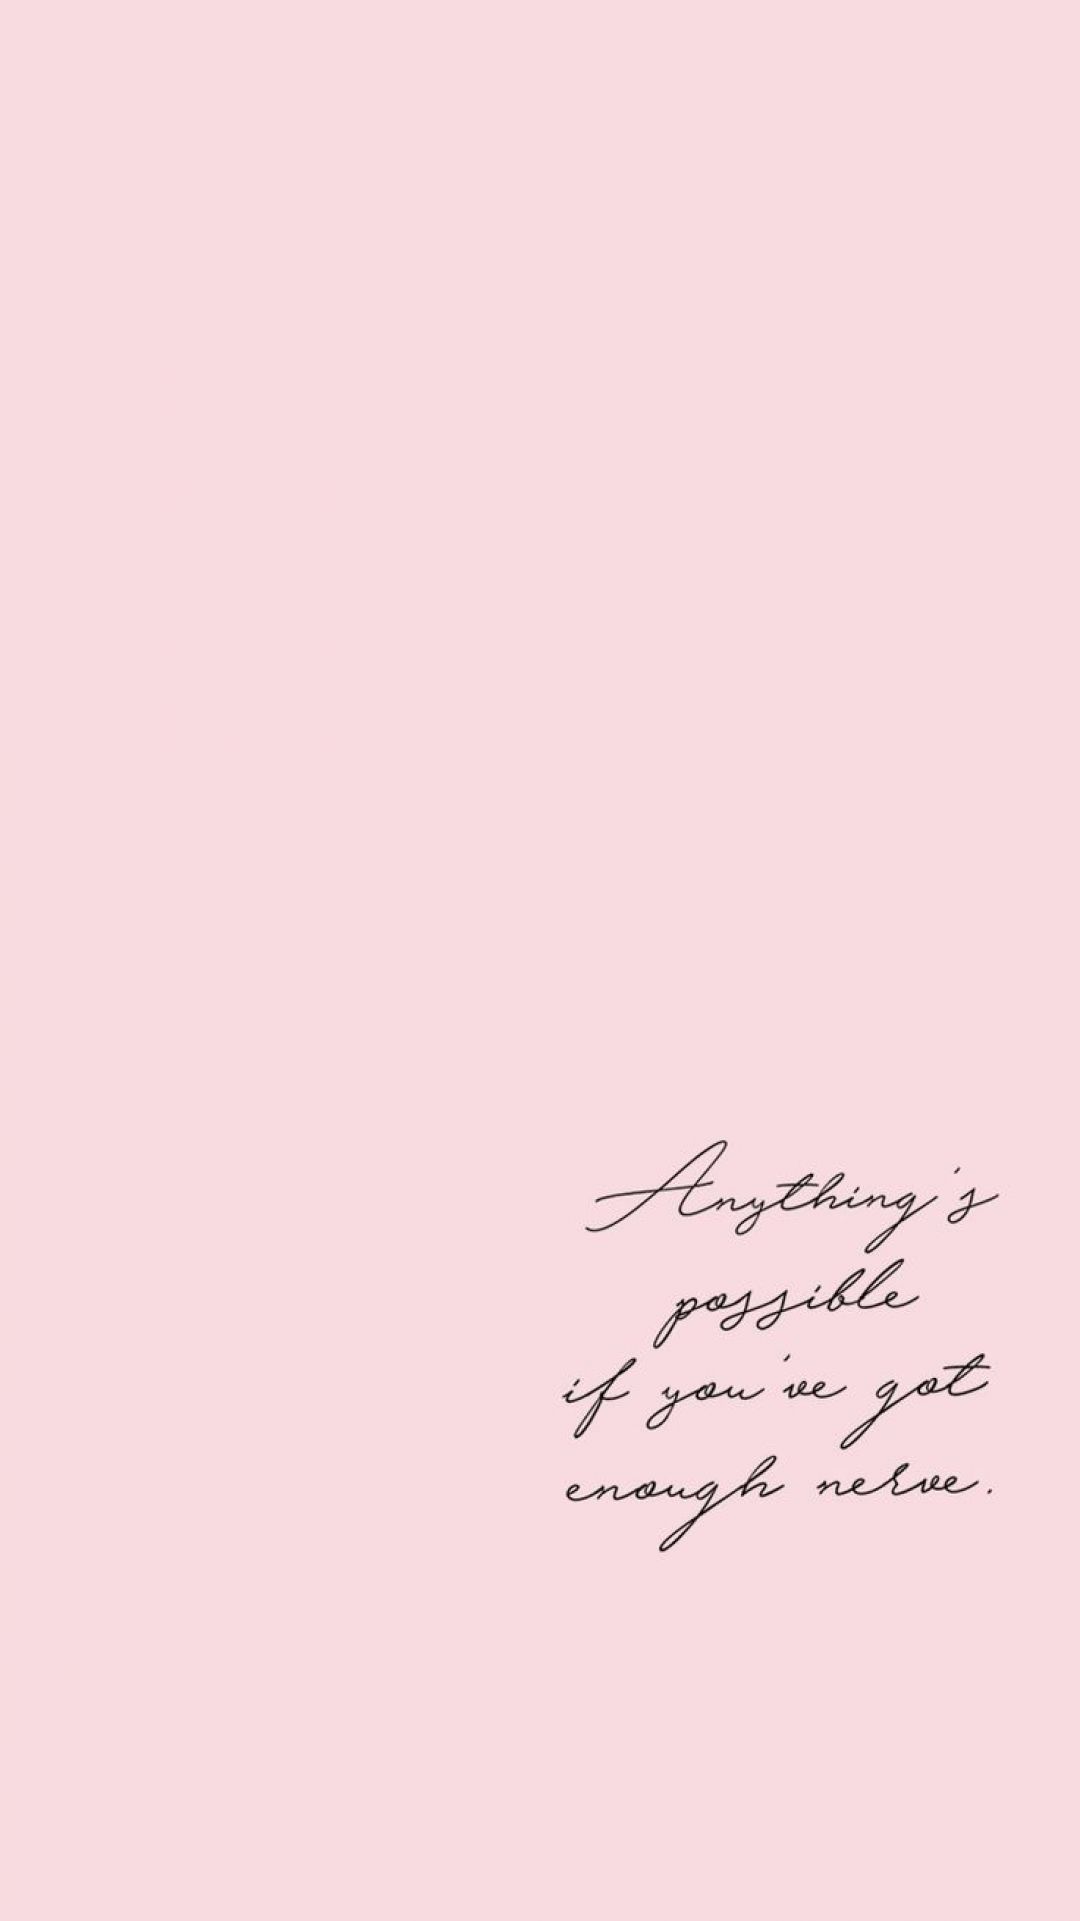 Free Download Positive Aesthetic Wallpaper Hd Wallpapers 1080x1921 For Your Desktop Mobile Tablet Explore 30 Positive Backgrounds Wallpaper Positive Positive Wallpaper Positive Wallpapers